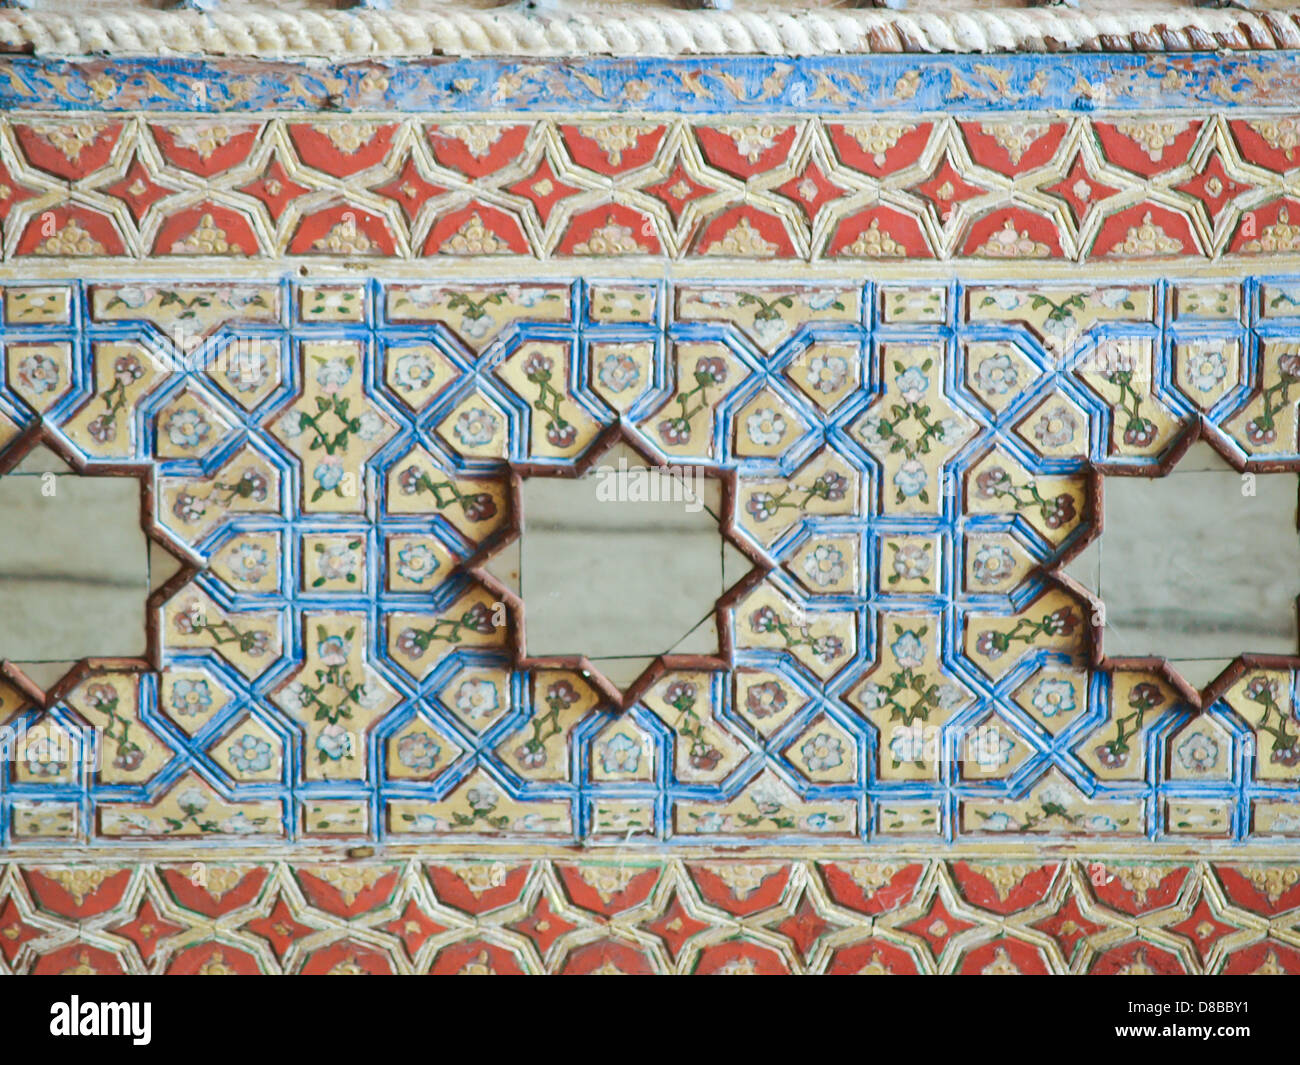 Mirror and Mosaic of Islamic pattern decoration in Chehel Sotoun (Sotoon) Palace built by Shah Abbas II, Isfahan, Iran Stock Photo